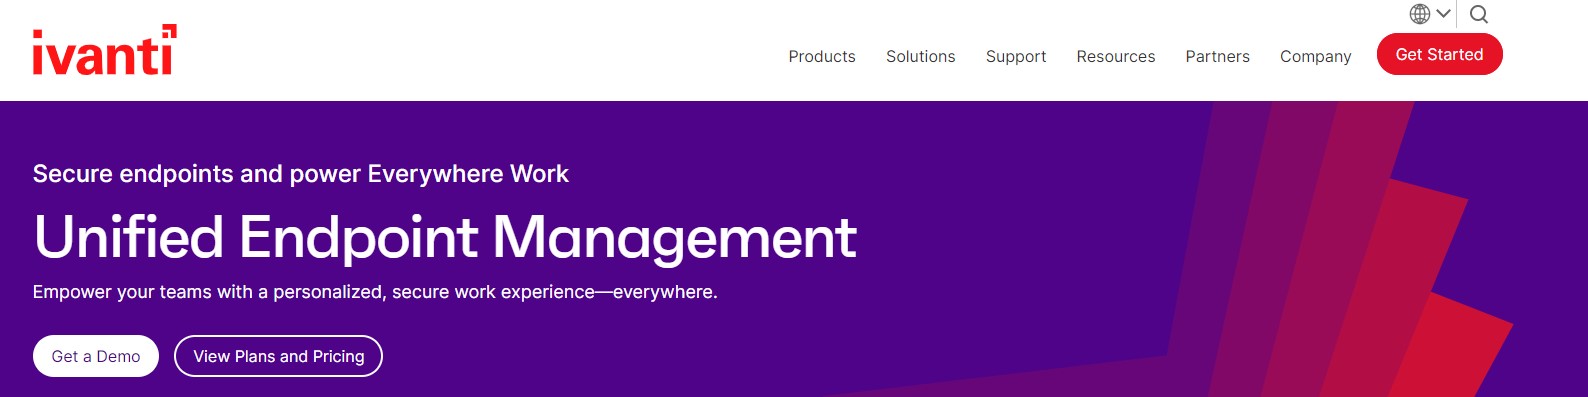 A webpage for Ivanti Unified Endpoint Management (UEM) with a purple background and the tagline "Secure endpoints and power Everywhere Work." The page encourages empowering teams with a personalized, secure work experience. It features options to "Get a Demo" and "View Plans and Pricing" with a prominent "Get Started" button in the top right corner. 